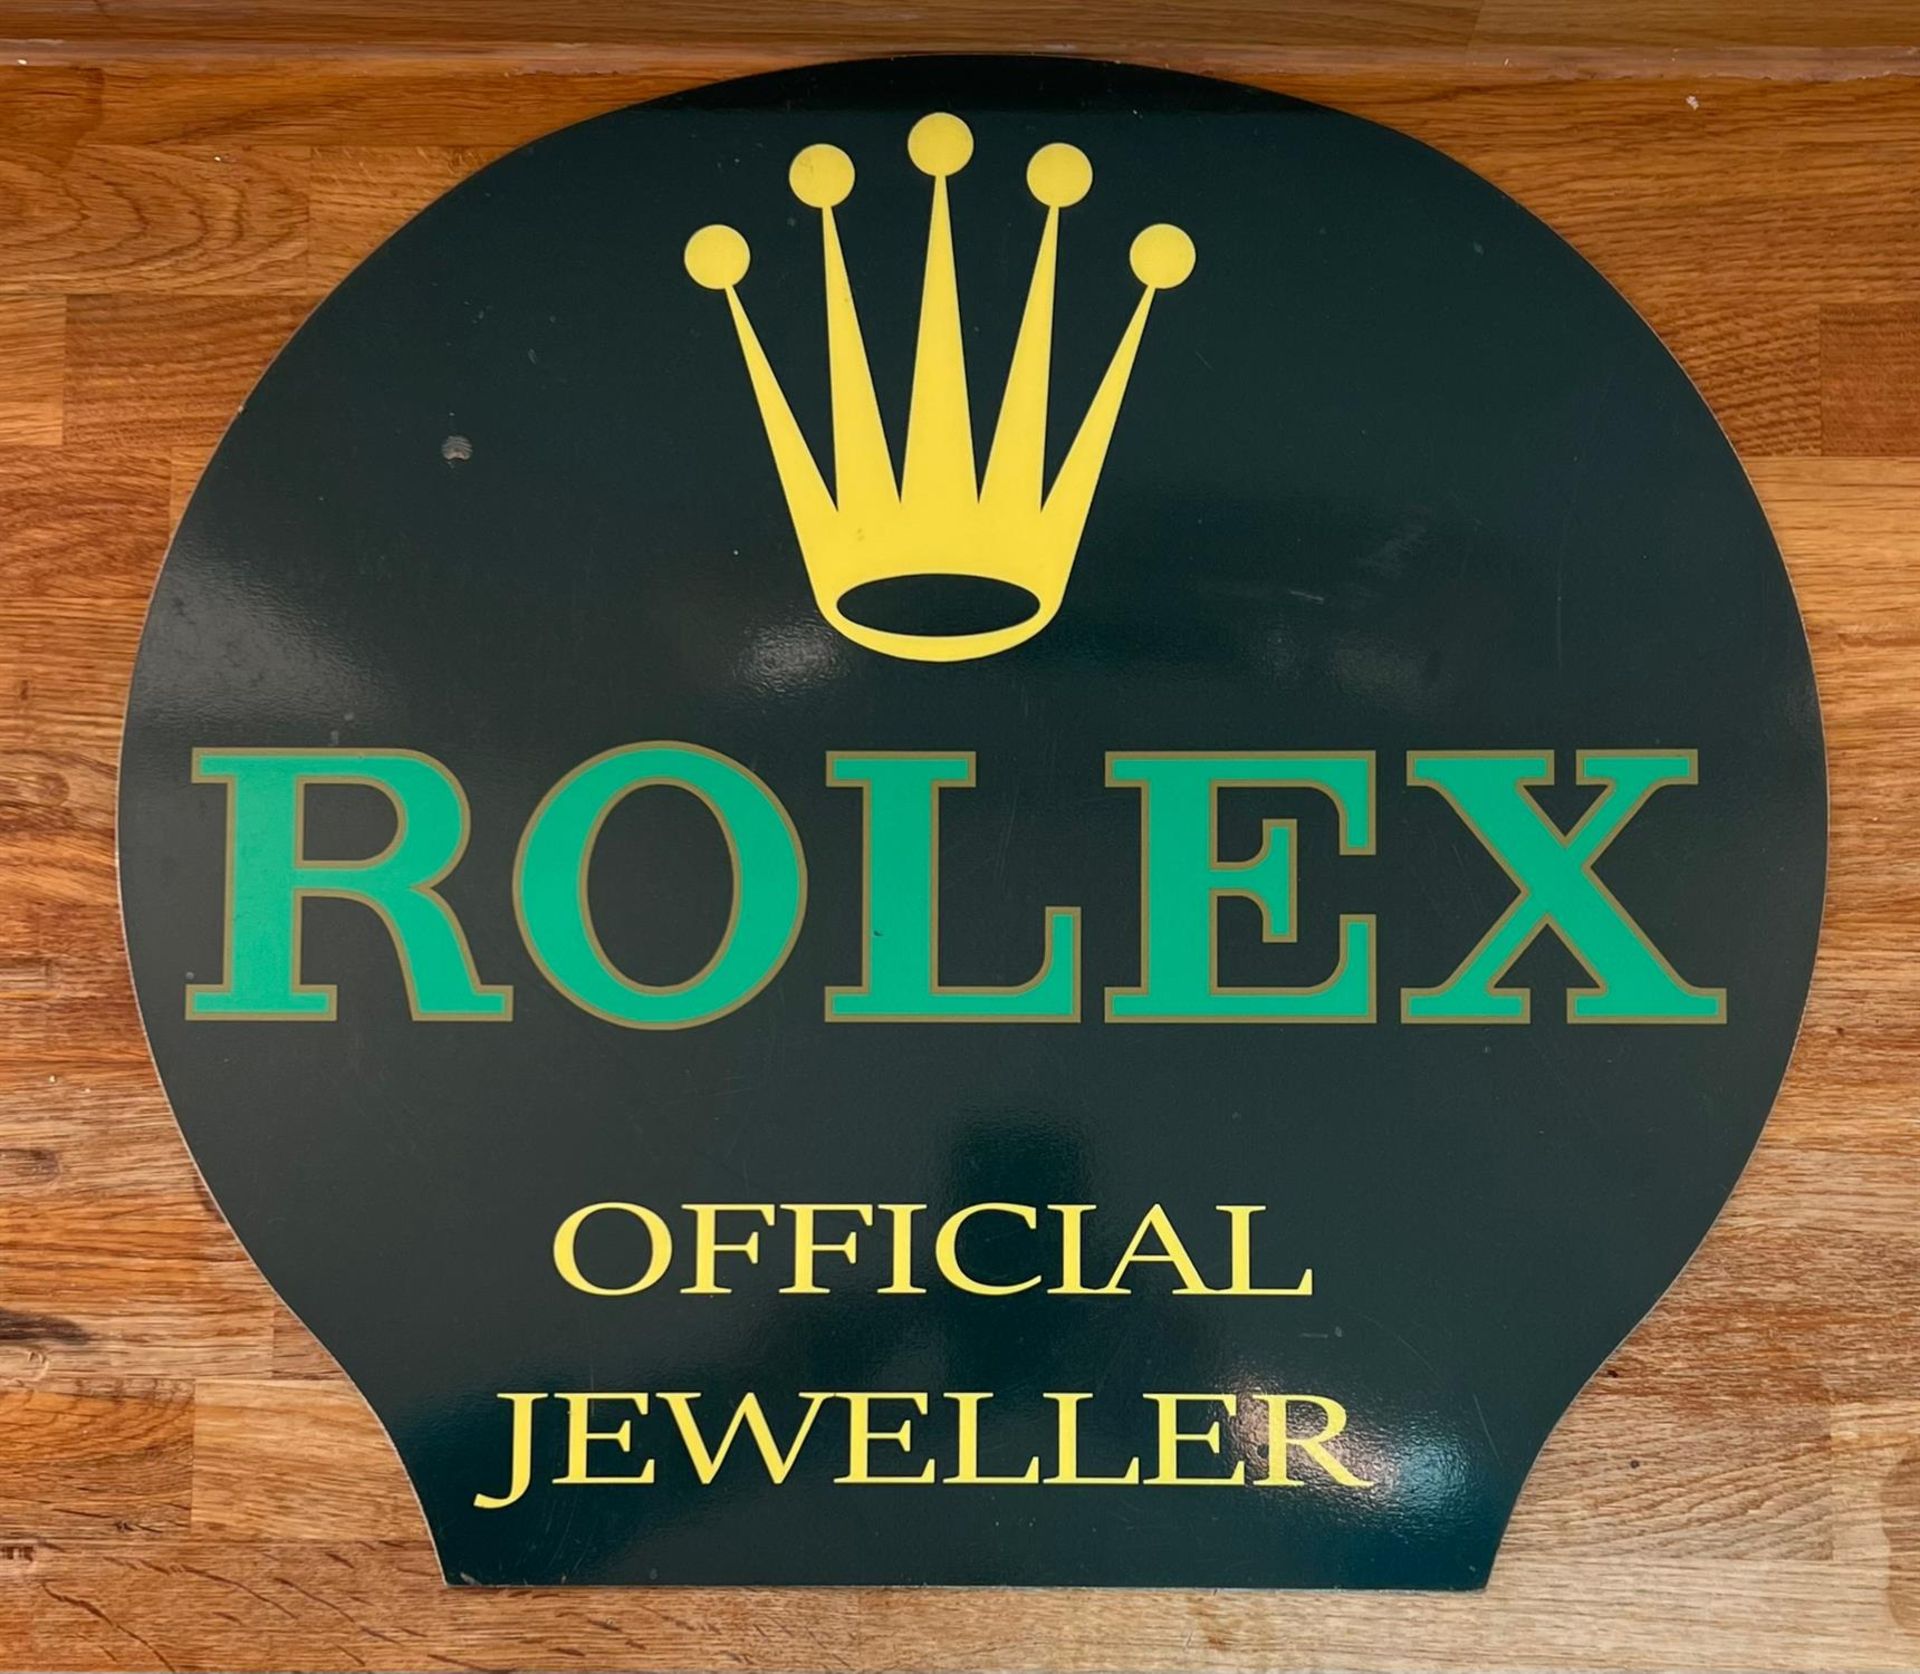 A Rare 'Rolex' Enamelled Tin-Plate Advertising Sign - Image 9 of 10